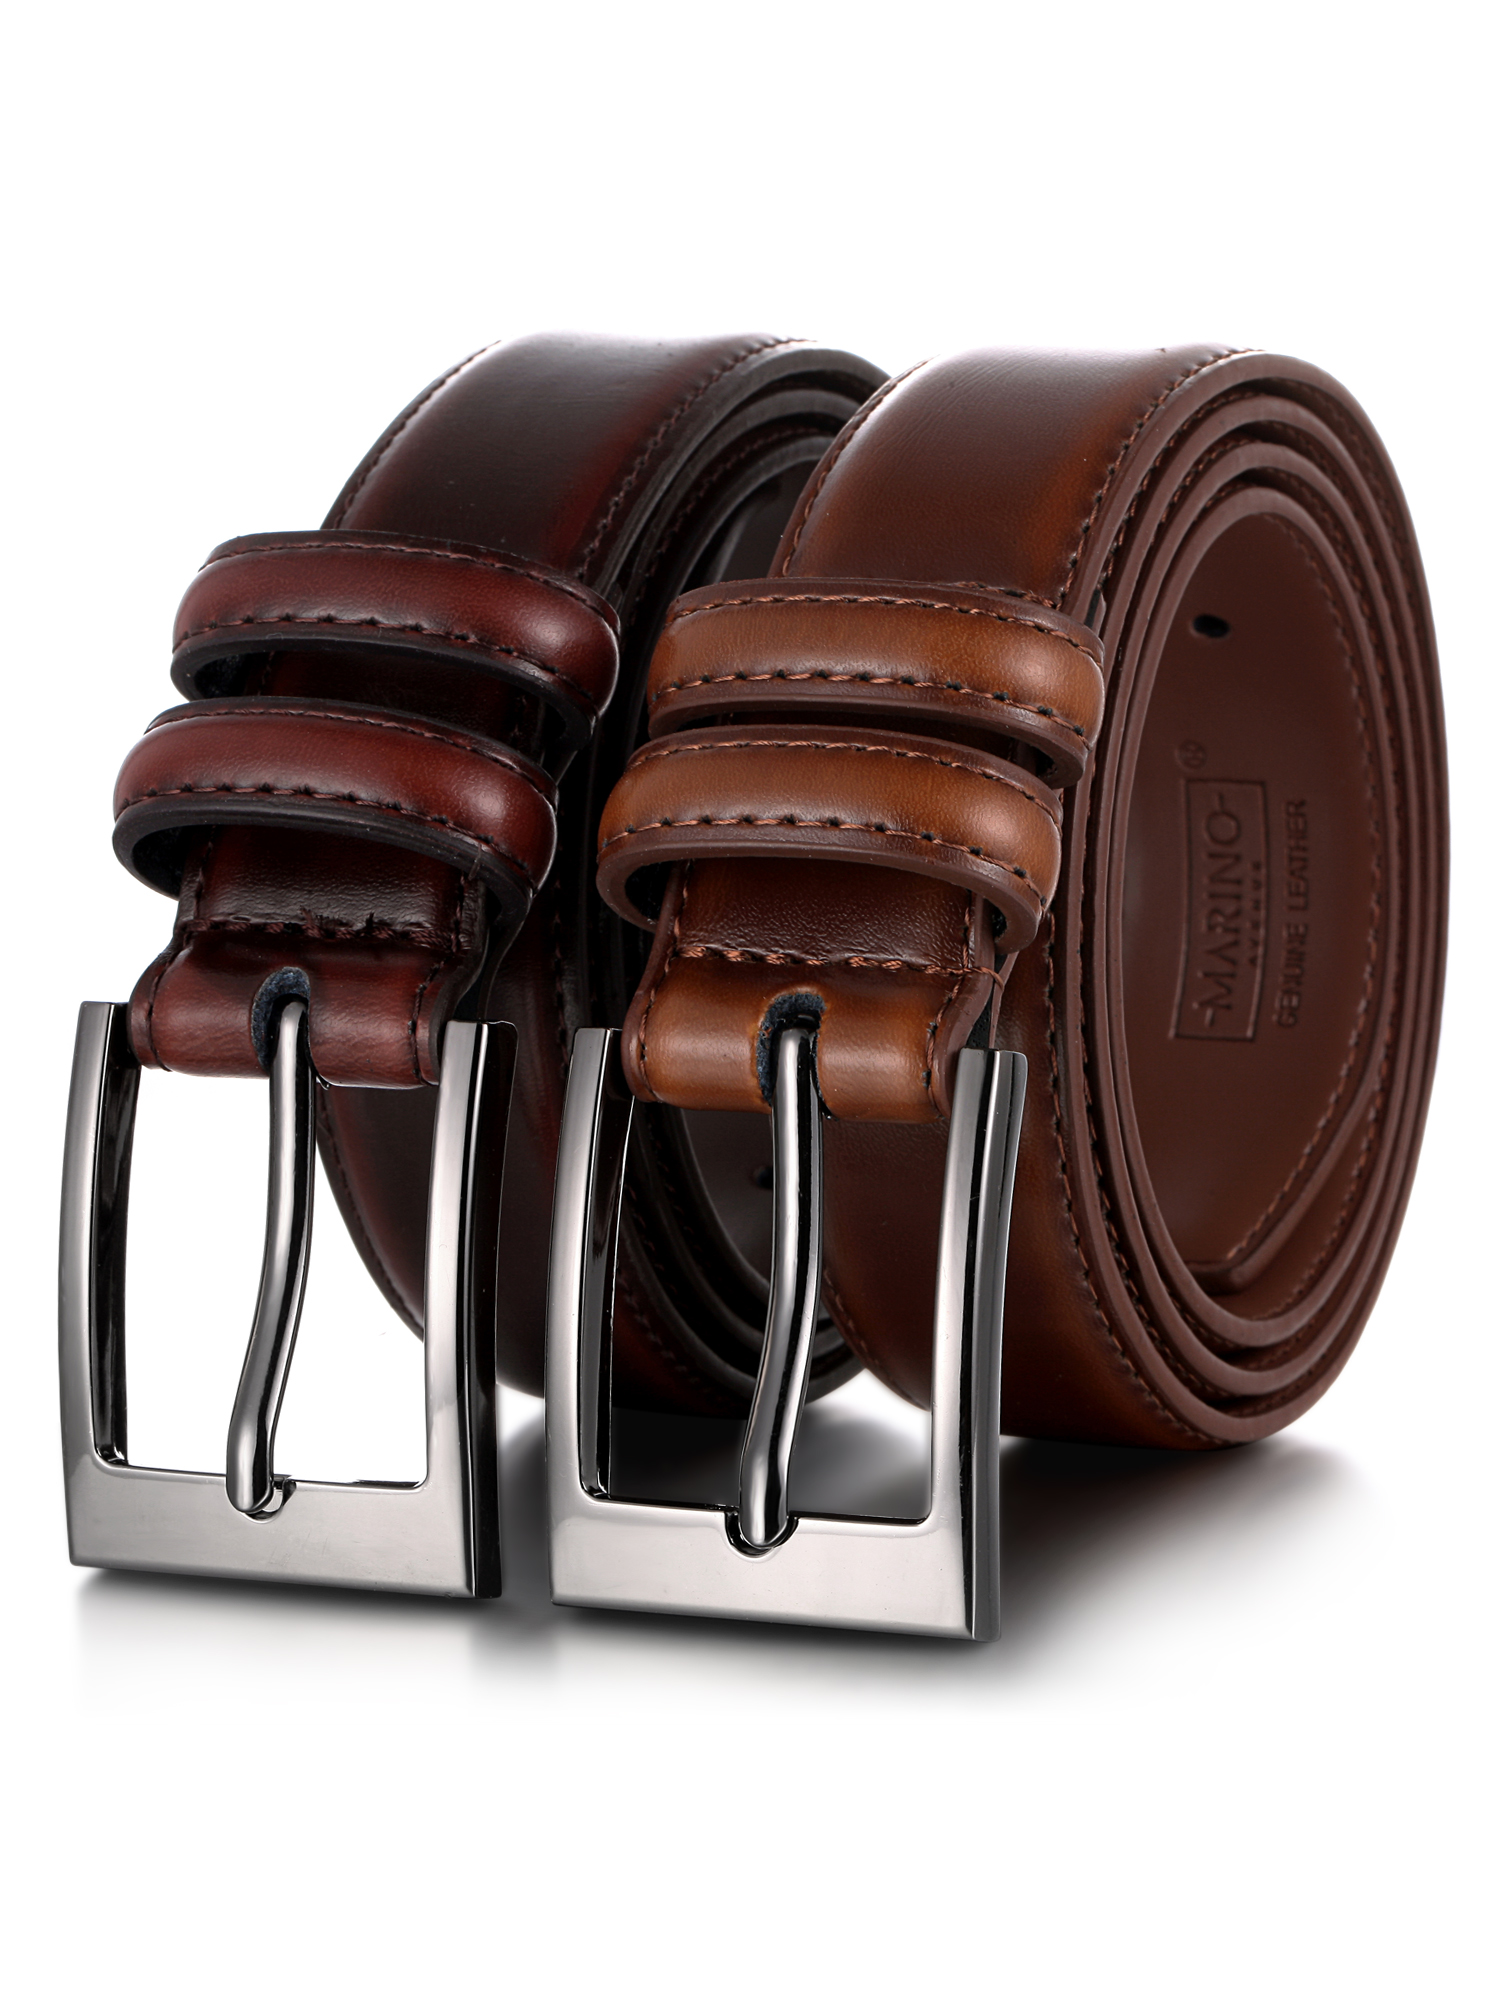 Marino’s Men Genuine Leather Dress Belt with Single Prong Buckle - Pack of 2 - image 1 of 6